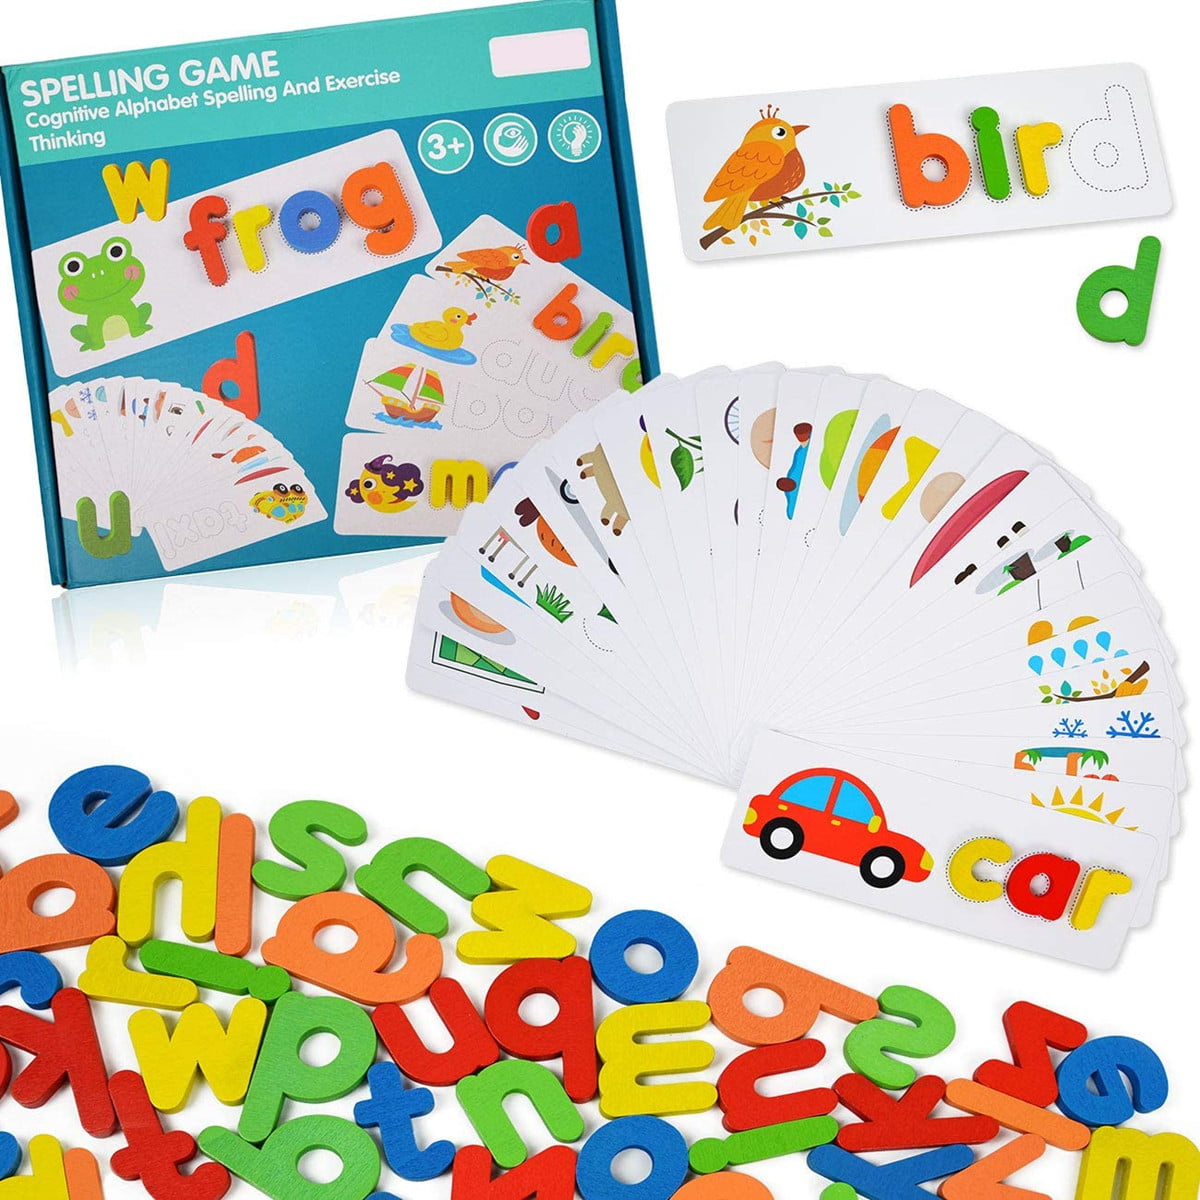 Spelling Game Kids Colorful Wooden Puzzle Learning Letters Skills Preschool Toy